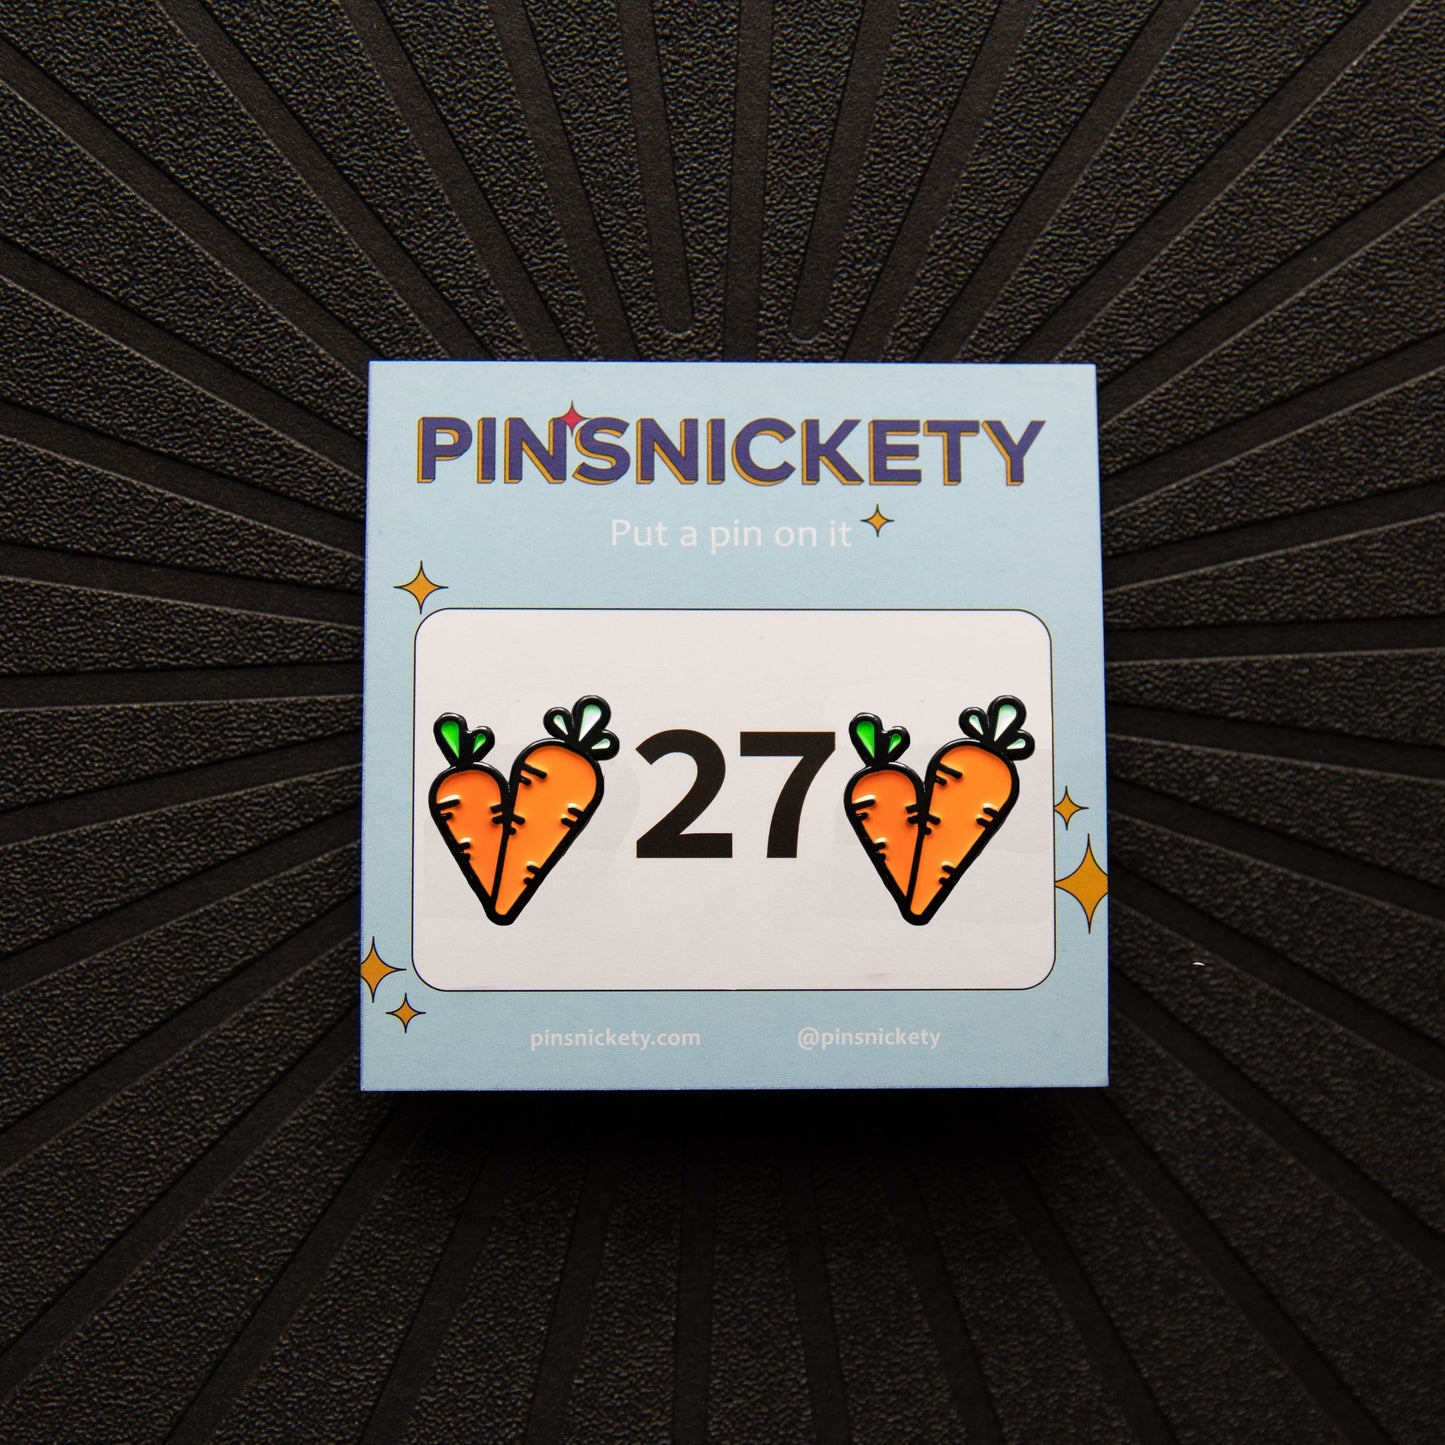 Pinsnickety Carrot horse show number pins on their product packaging card